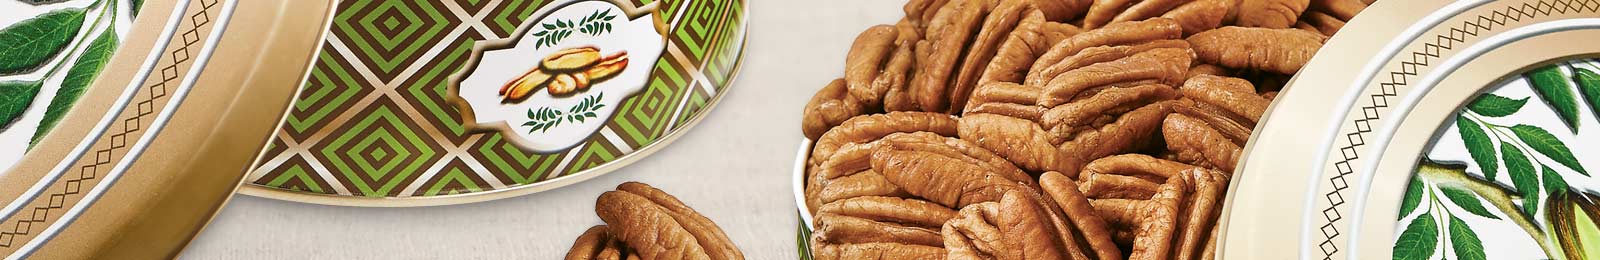 Healthy Pecan Gifts